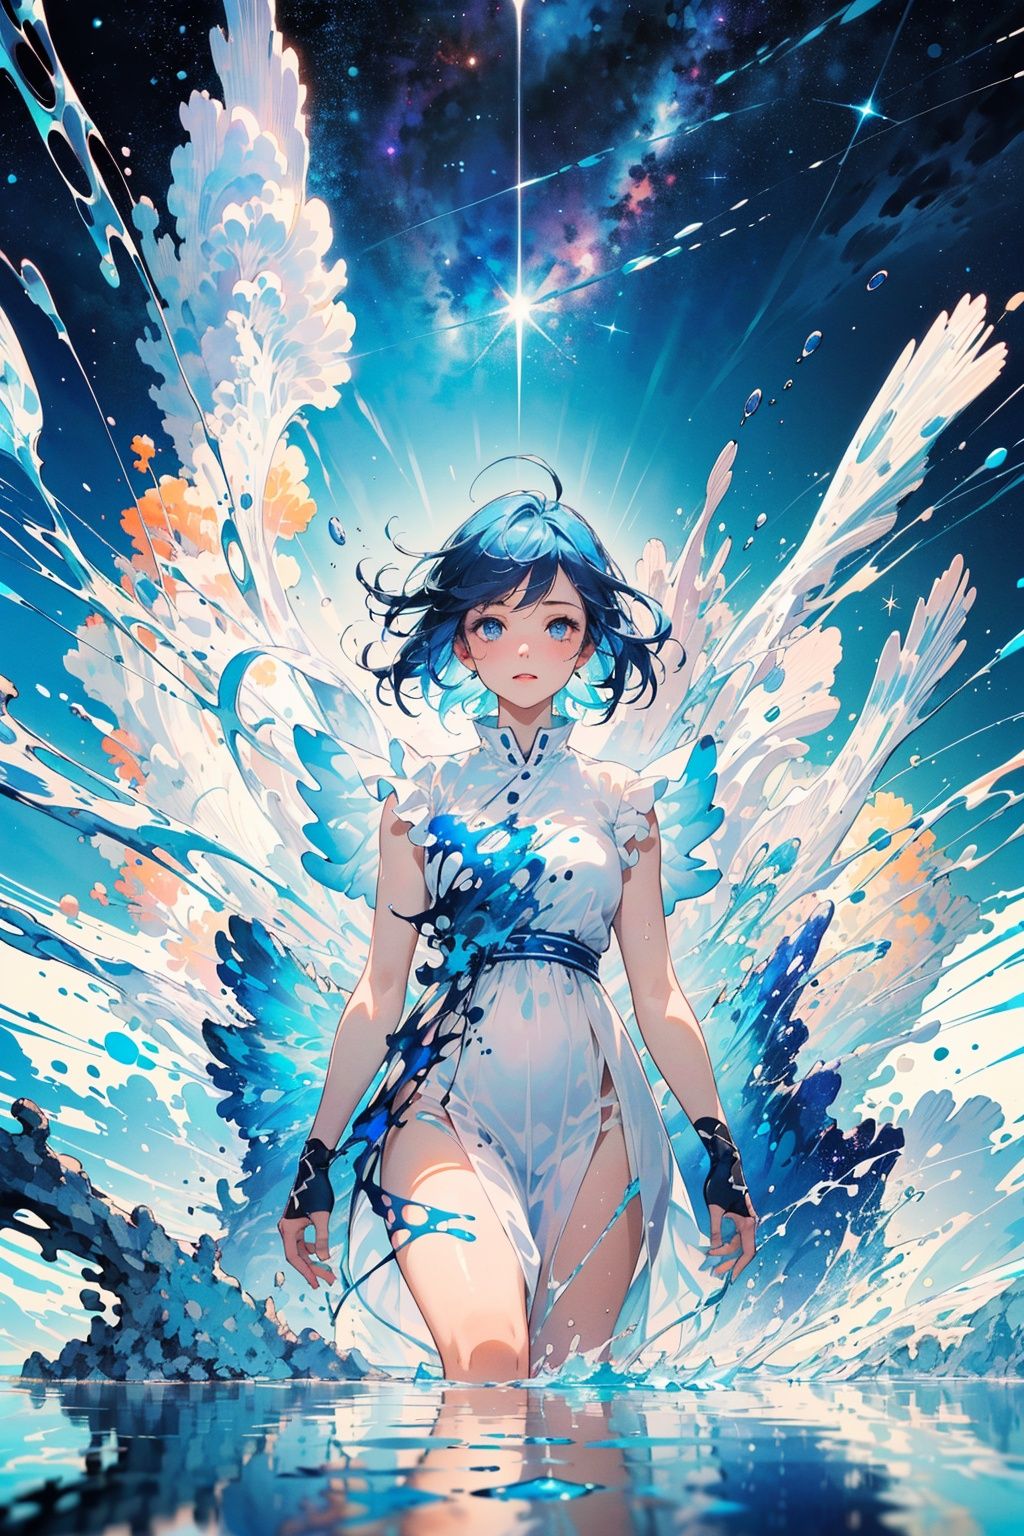  Best quality,8k,cg,
absurdres, highres, (official art, beautiful and aesthetic:1.2), (close view:1.15), (1girl, blue hair, middle hair, blue eyes, shining eyes, white long dress, Blue Frill,:1.2), blue sky, Sparkling Galaxy, (Salar de Uyuni:1.2), (fractal art:0.8), water effects, ripple effects, (flower effects:0.65), light effects,